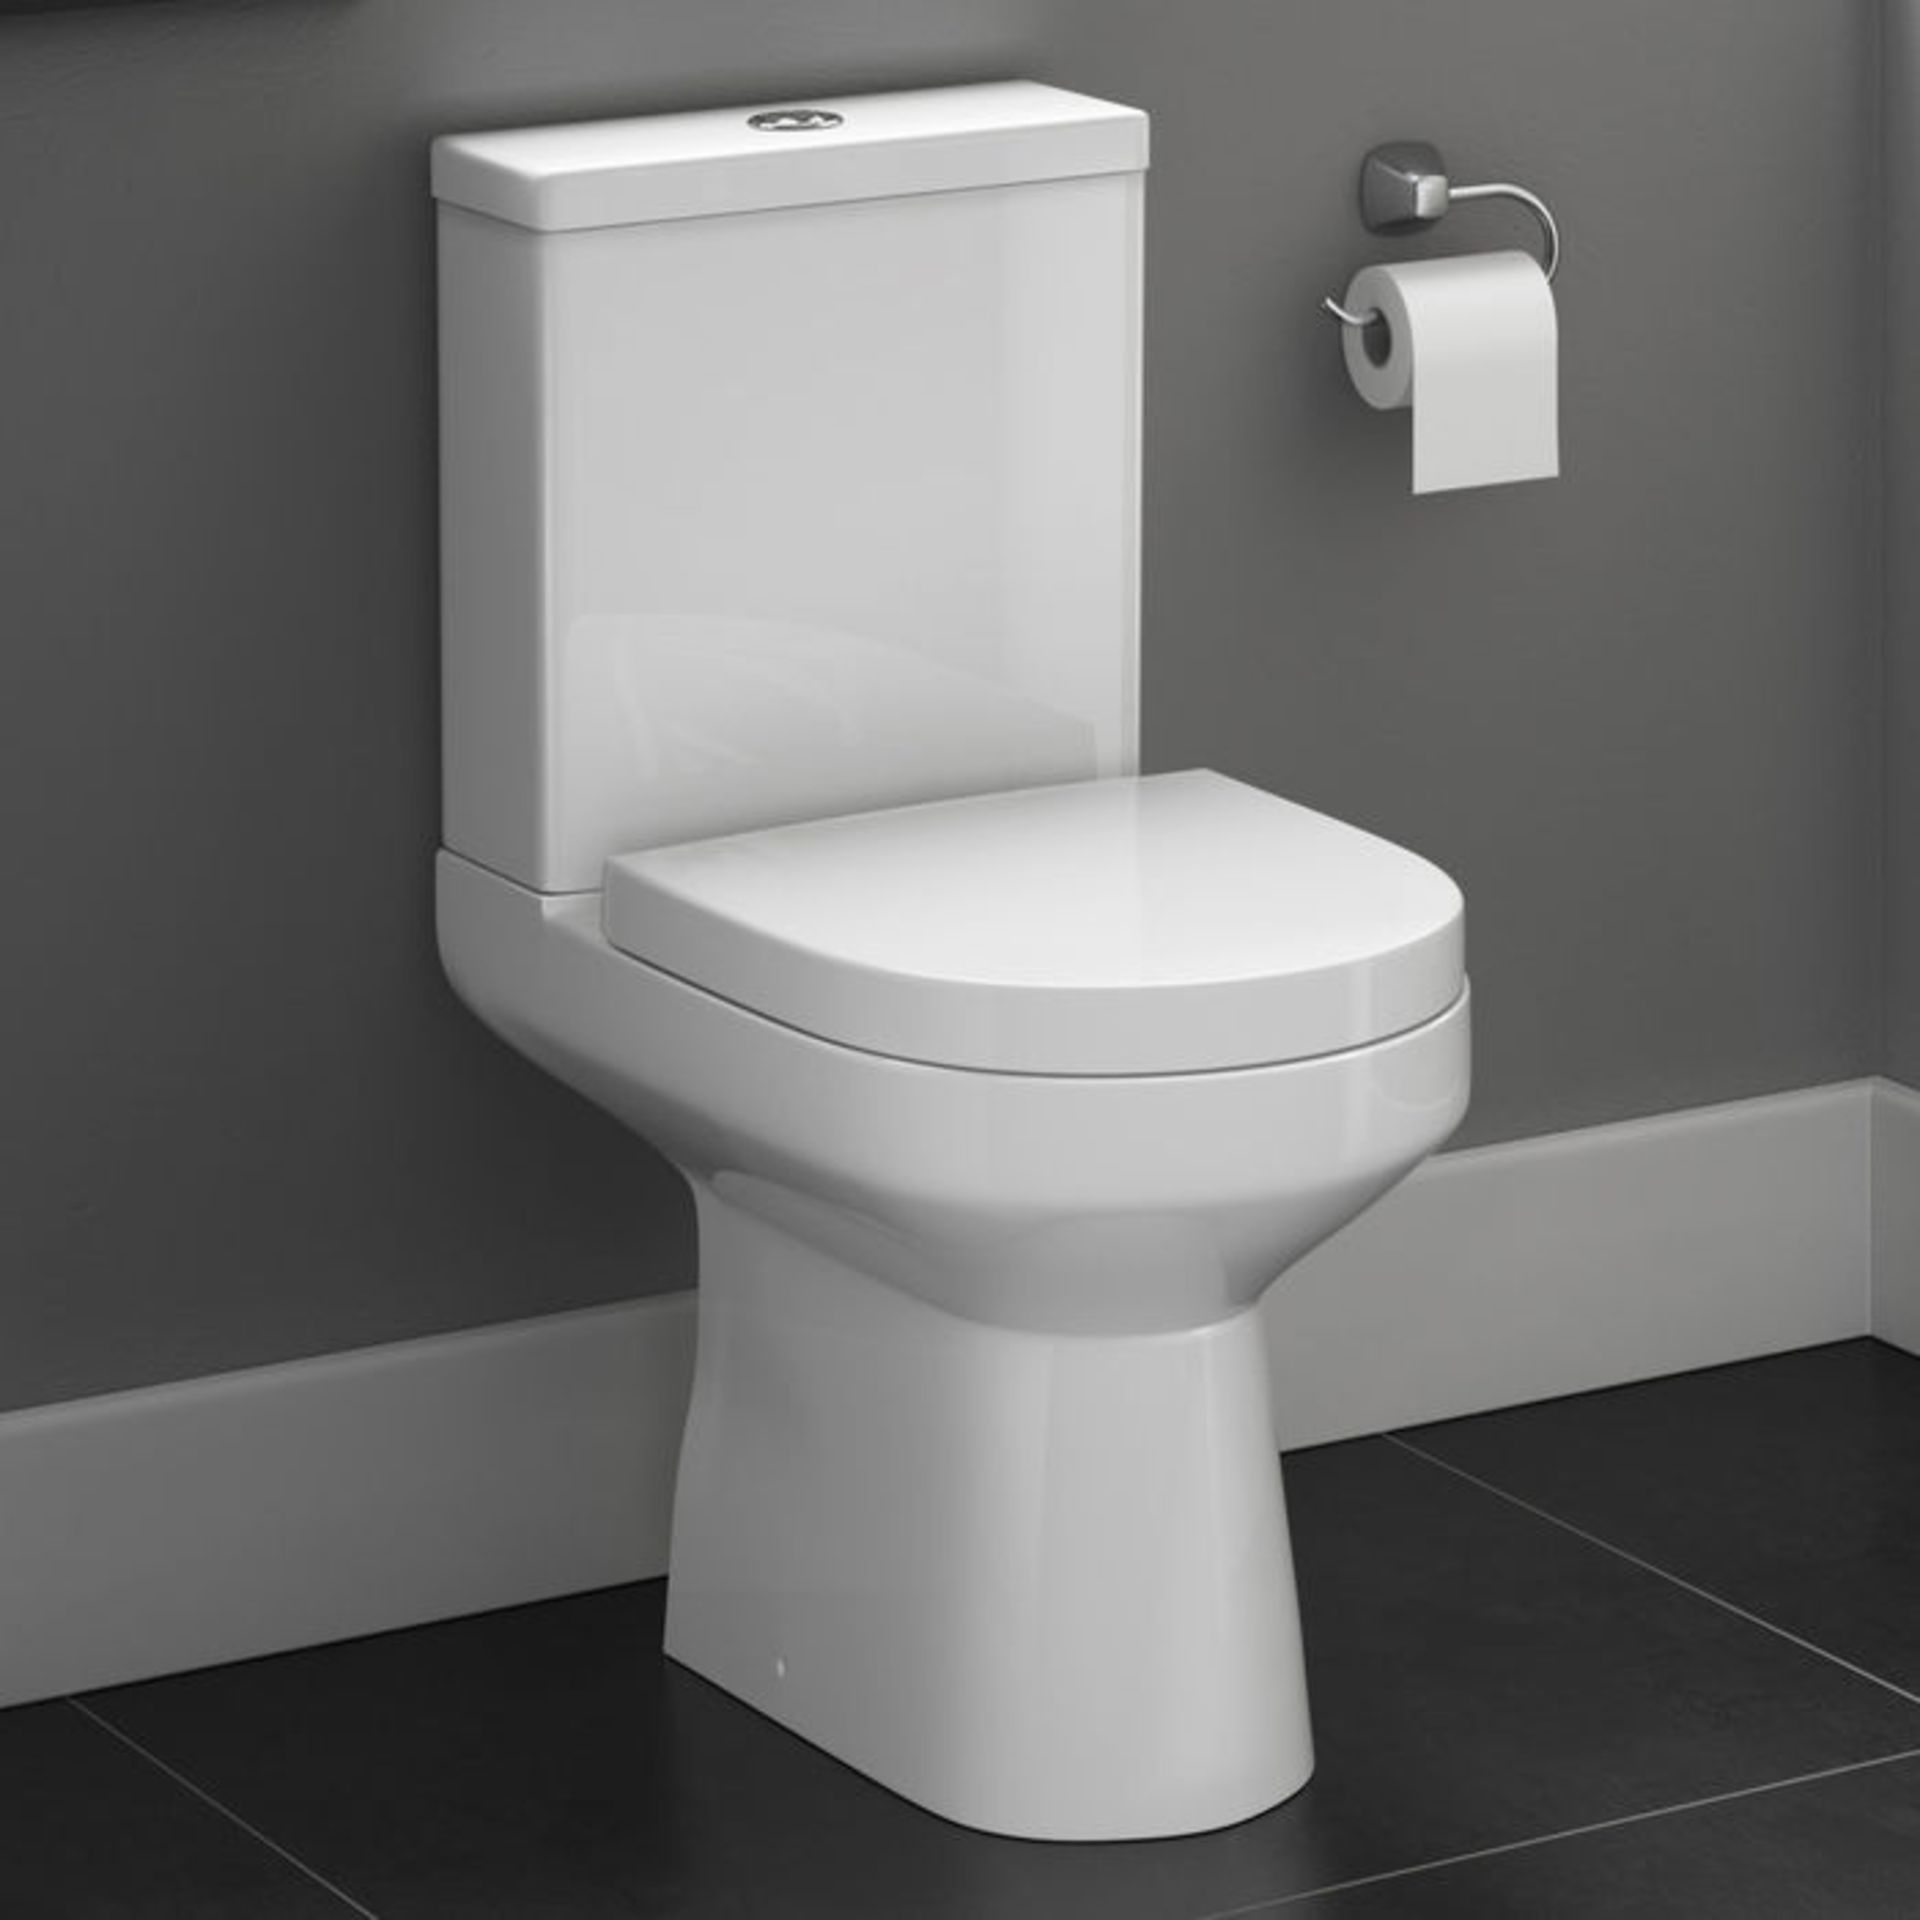 (O144) Cesar III Close Coupled Toilet & Cistern inc Soft Close Seat. Made from White Vitreous